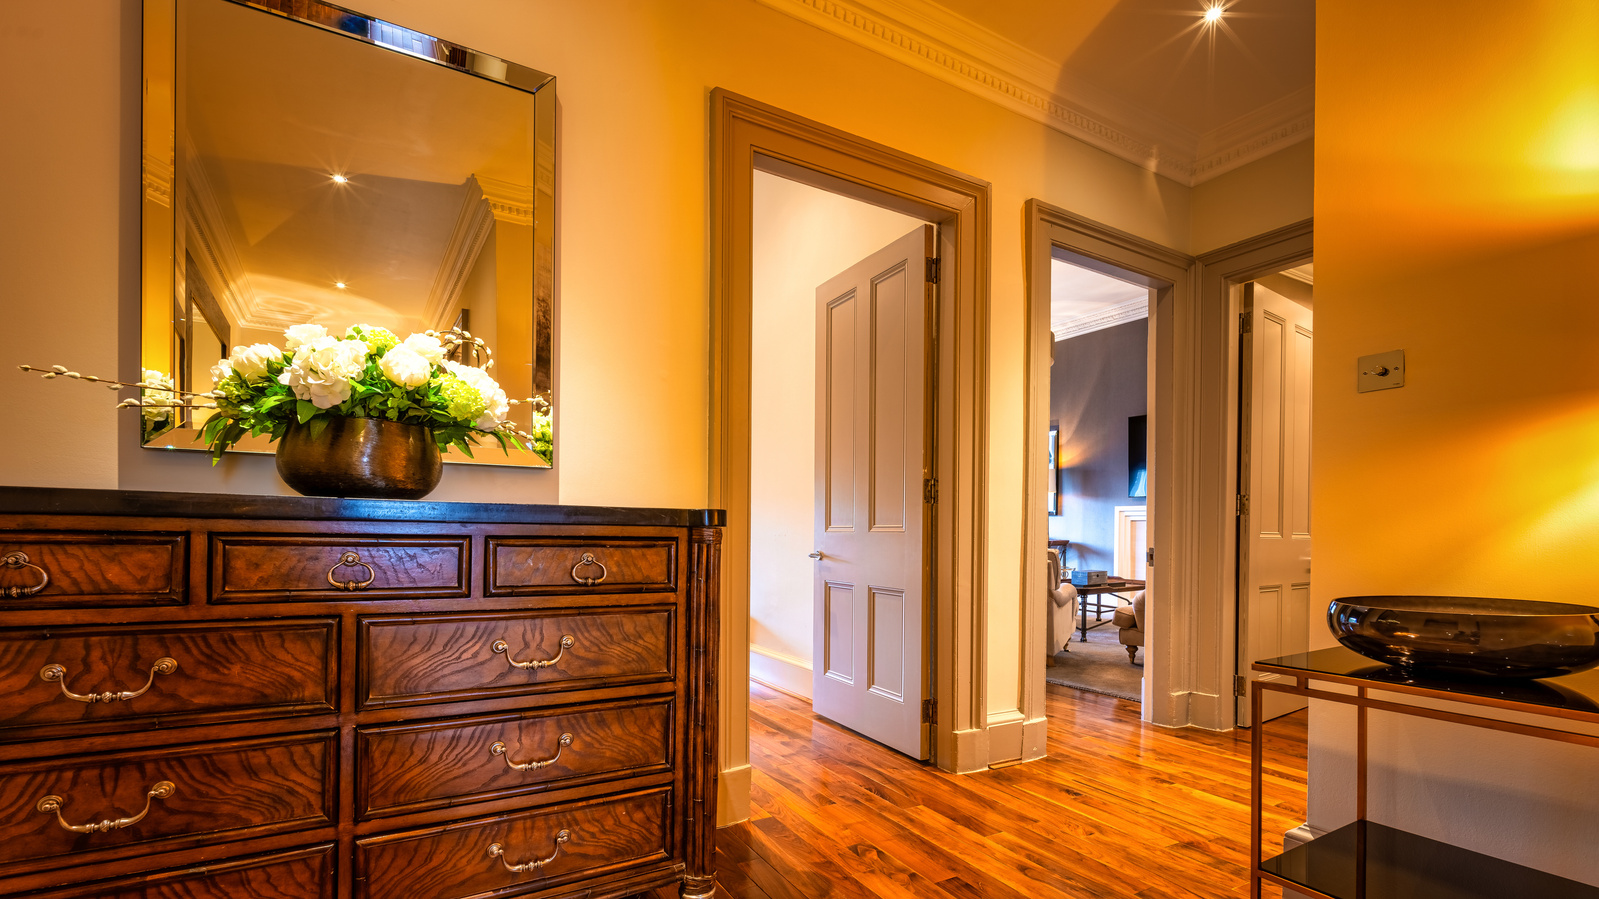 Hallway for Scotland Interior Property - Photography by Nate Cleary